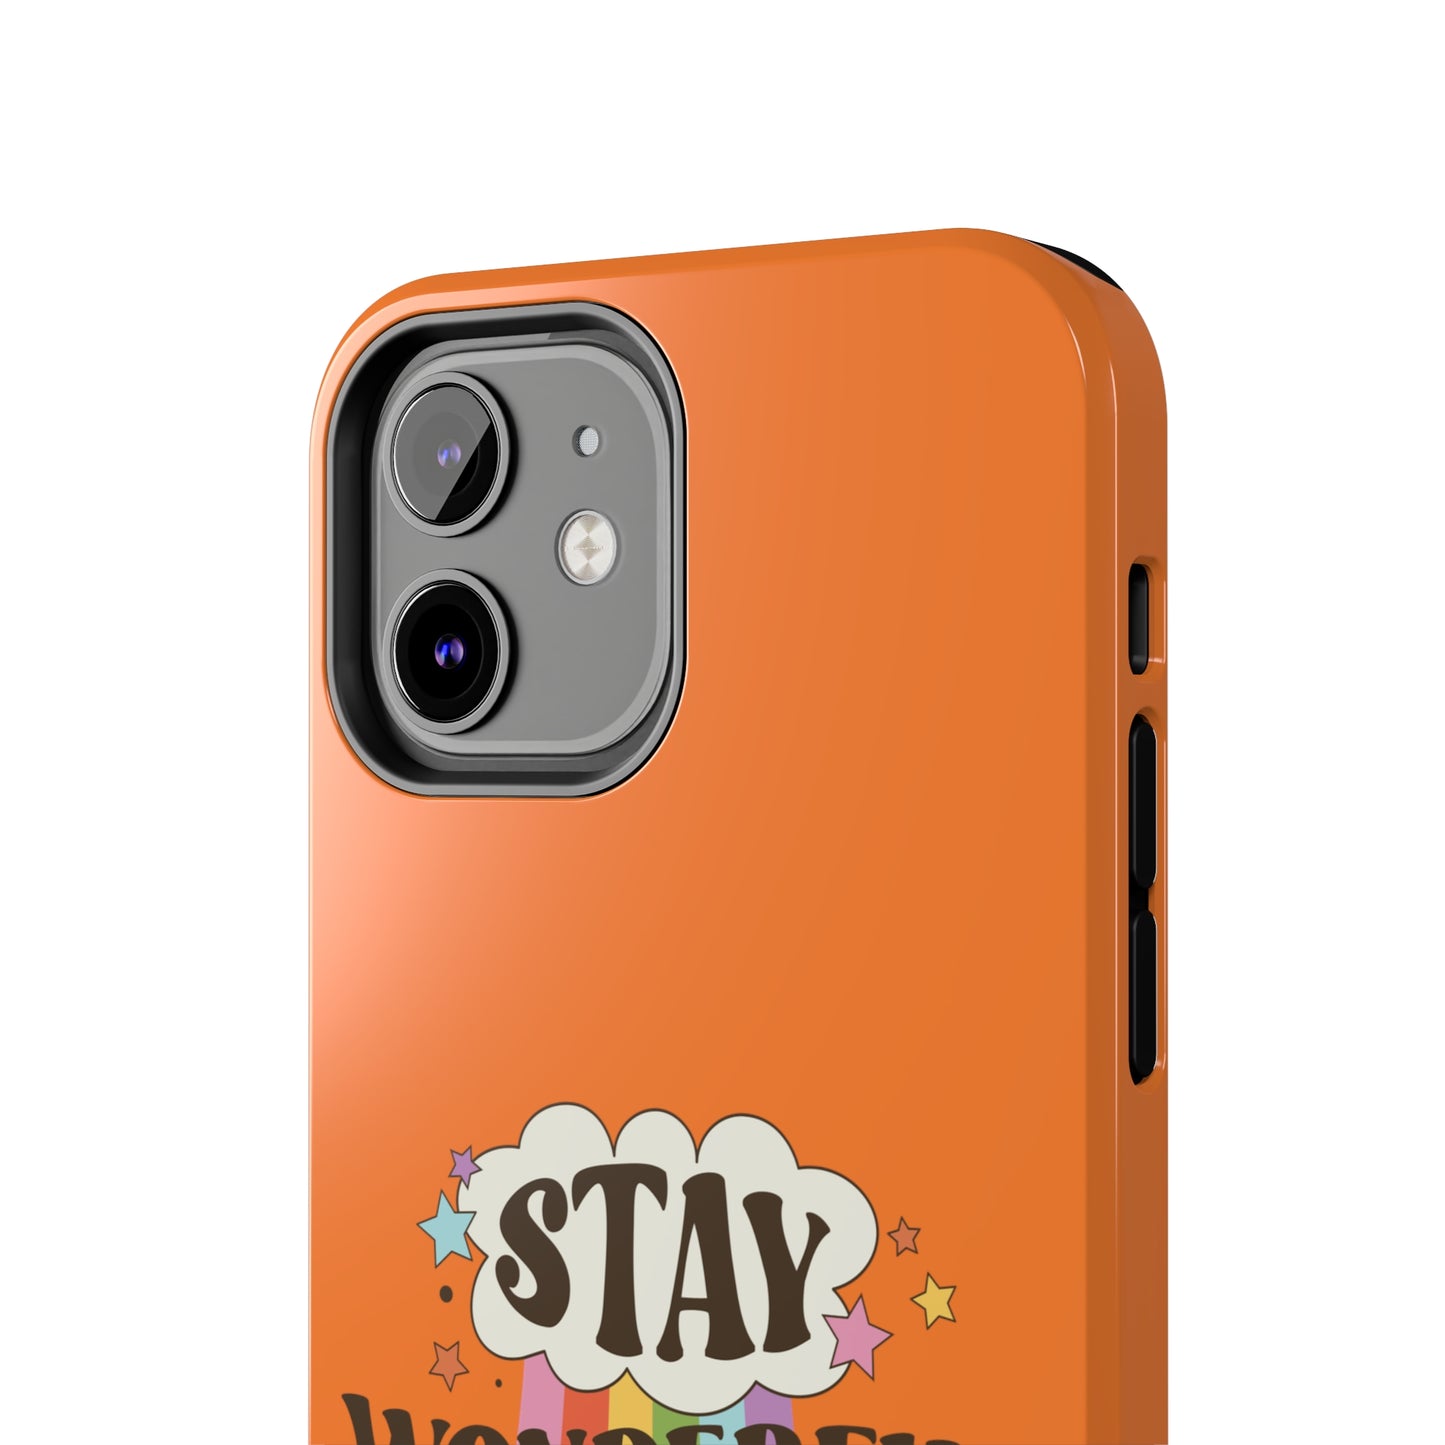 Stay Wonderful Daisies: iPhone Tough Case Design - Wireless Charging - Superior Protection - Original Designs by TheGlassyLass.com